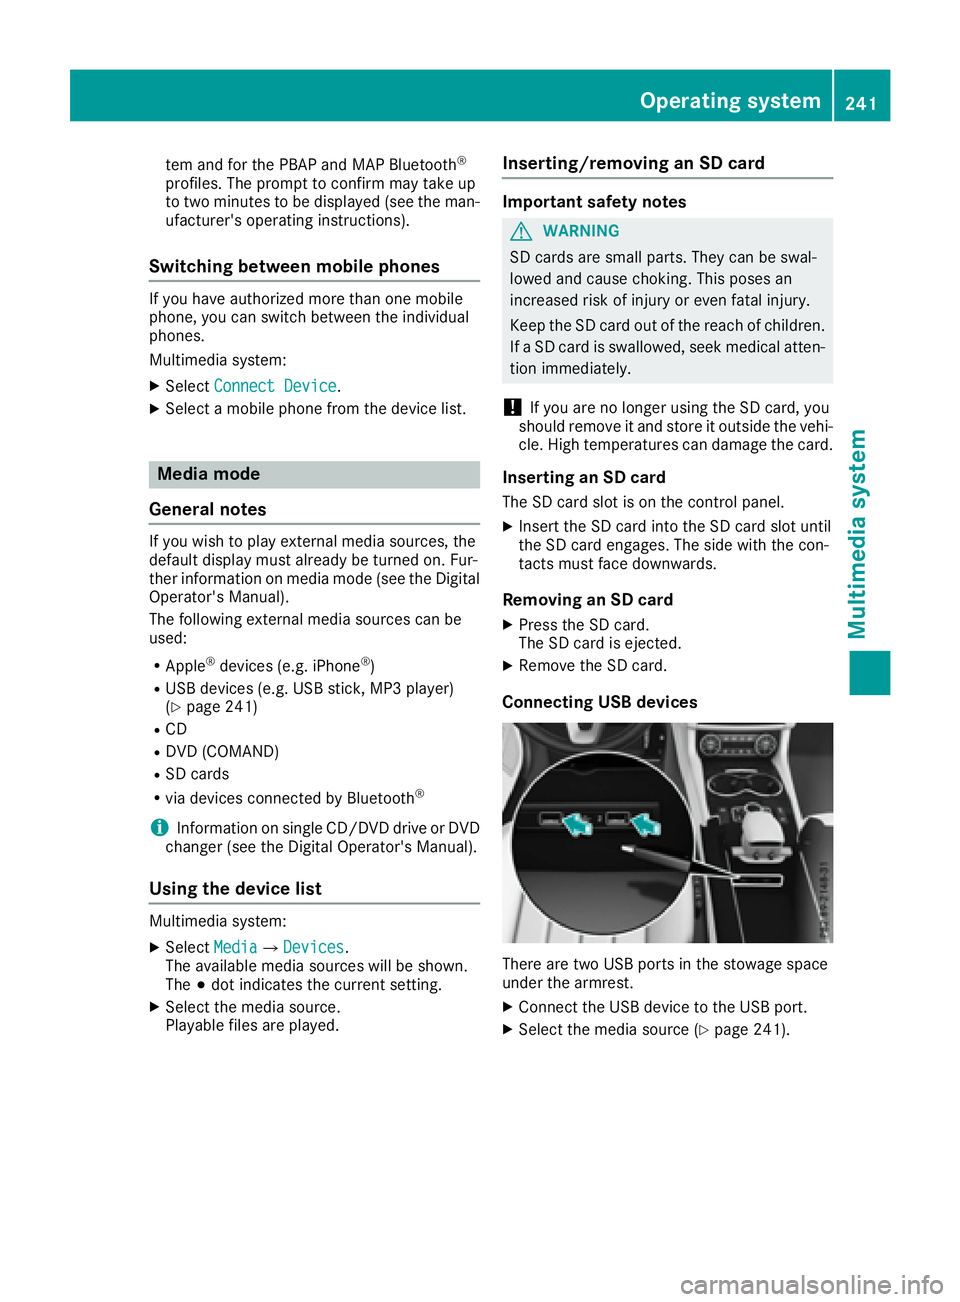 MERCEDES-BENZ CLS 2017  Owners Manual tem and for the PBAP and MAP Bluetooth ®
profiles. The prompt to confirm may take up
to two minutes to be displayed (see the man-
ufacturer's operating instructions).
Switching between mobile pho